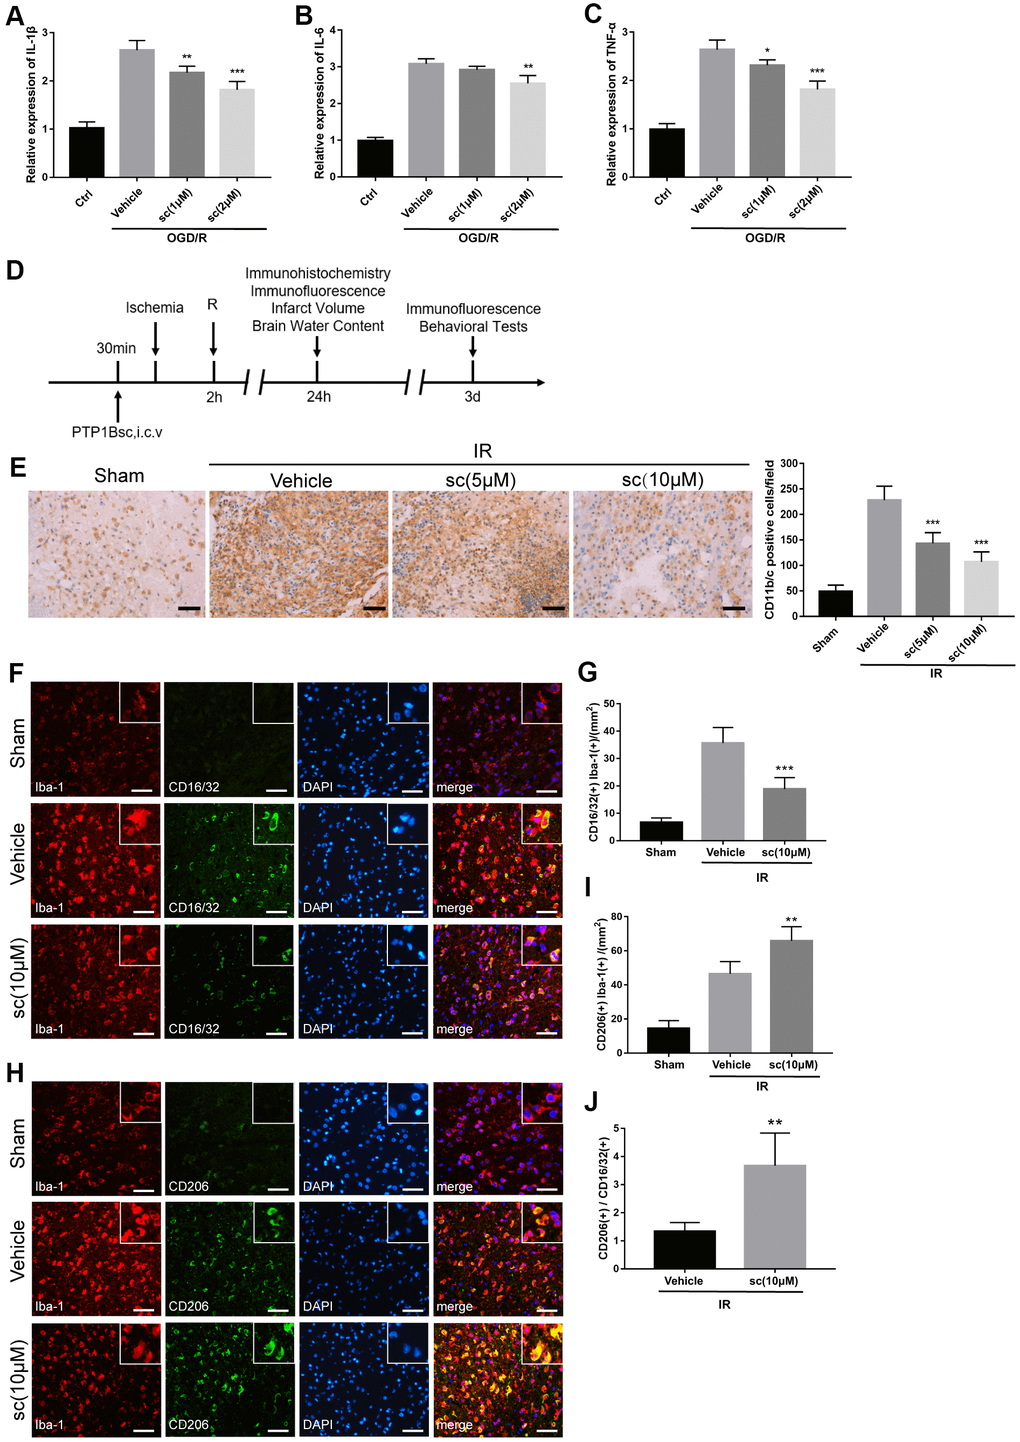 PTP1B inhibitor treatment attenuated microglial activation and promoted M2 microglial polarization after ischemic injury. (A–C) IL-1β, IL-6, and TNF-α mRNA levels after the OGD/R insult were tested by real-time PCR in rat primary microglia. Fold-changes were normalized to β-actin and quantitative results are presented as the mean ± SEM (n = 5 per group). (D) Outline of in vivo experiment to detect the effect of intracerebroventricular administration of PTP1B inhibitor after cerebral IR injury. (E) Immunohistology to detect CD11b/c cell in the ipsilateral cerebral cortex, and quantitative analysis of CD11b/c-positive cell number are presented as the mean ± SEM (n = 5 per group). Scale bar = 50 μm. (F, G) Double immunofluorescence to detect CD16/32(+) Iba-1(+) cell in ipsilateral cerebral cortex 72 h after IR injury, and quantitative analysis of CD16/32(+) Iba-1(+) cell density (presented as the mean ± SEM, n = 6 per group). Scale bar = 50 μm. (H, I) Double immunofluorescence to detect CD206(+) Iba-1(+) cells in the ipsilateral cerebral cortex 72 h after IR injury, and quantitative analysis of CD206(+) Iba-1(+) cell density (presented as the mean ± SEM, n = 6 per group). Scale bar = 50 μm. (J) Quantitative analysis of the ratio of Iba1(+)/CD206(+) microglia to Iba-1(+)/CD16/32(+) microglia; the results are presented as the mean ± SEM. *p p p 